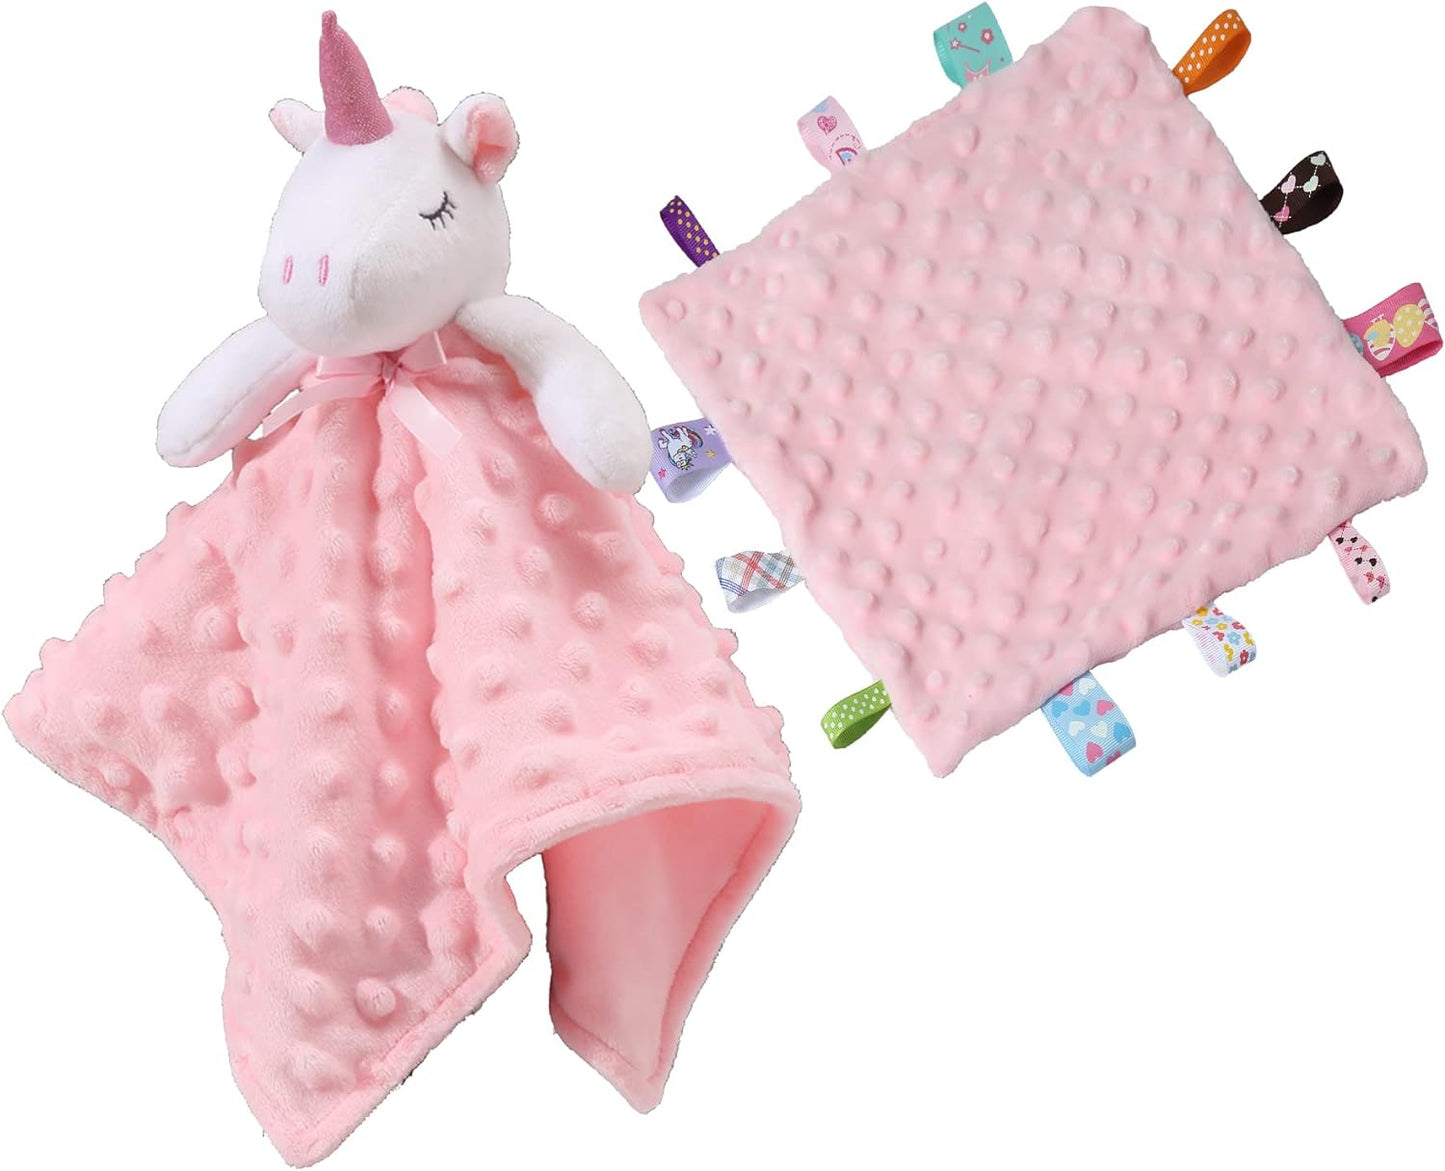 CREVENT Cozy Plush Baby Security Blanket, Loveys for Baby Girls and Boys, Birthday (Brown Deer)